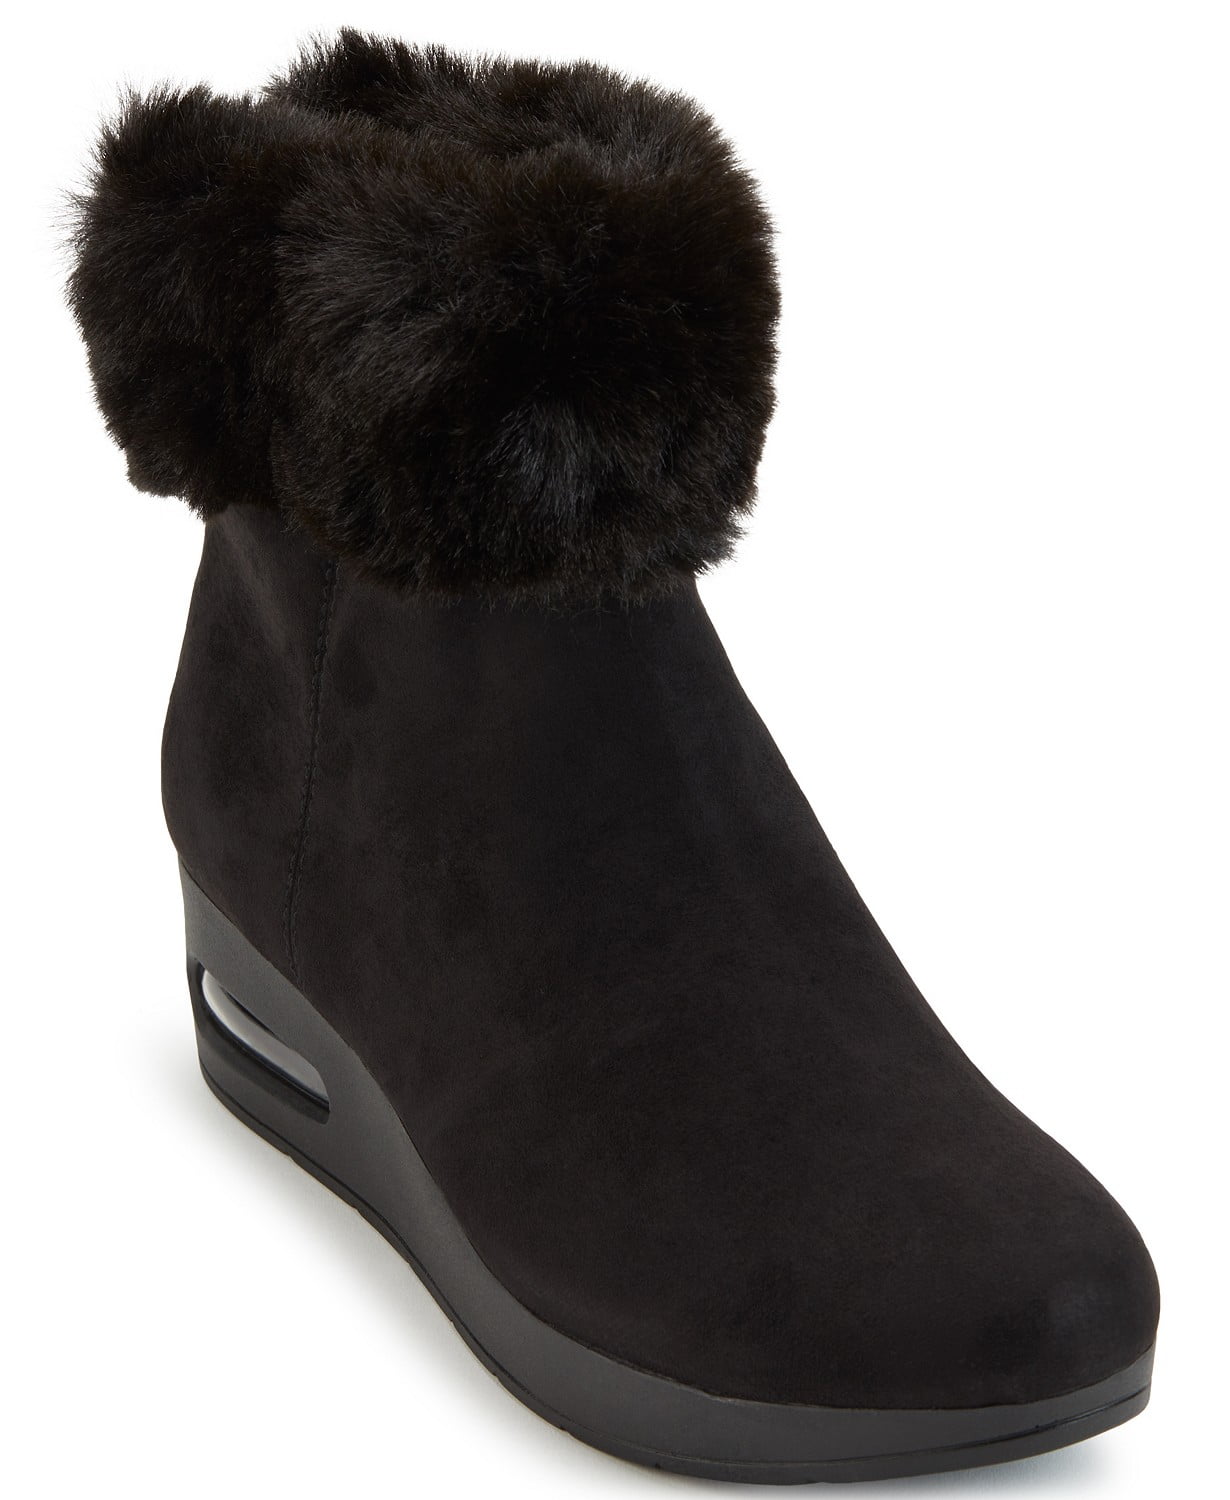 woocommerce-673321-2209615.cloudwaysapps.com-dkny-womens-black-suede-abri-booties